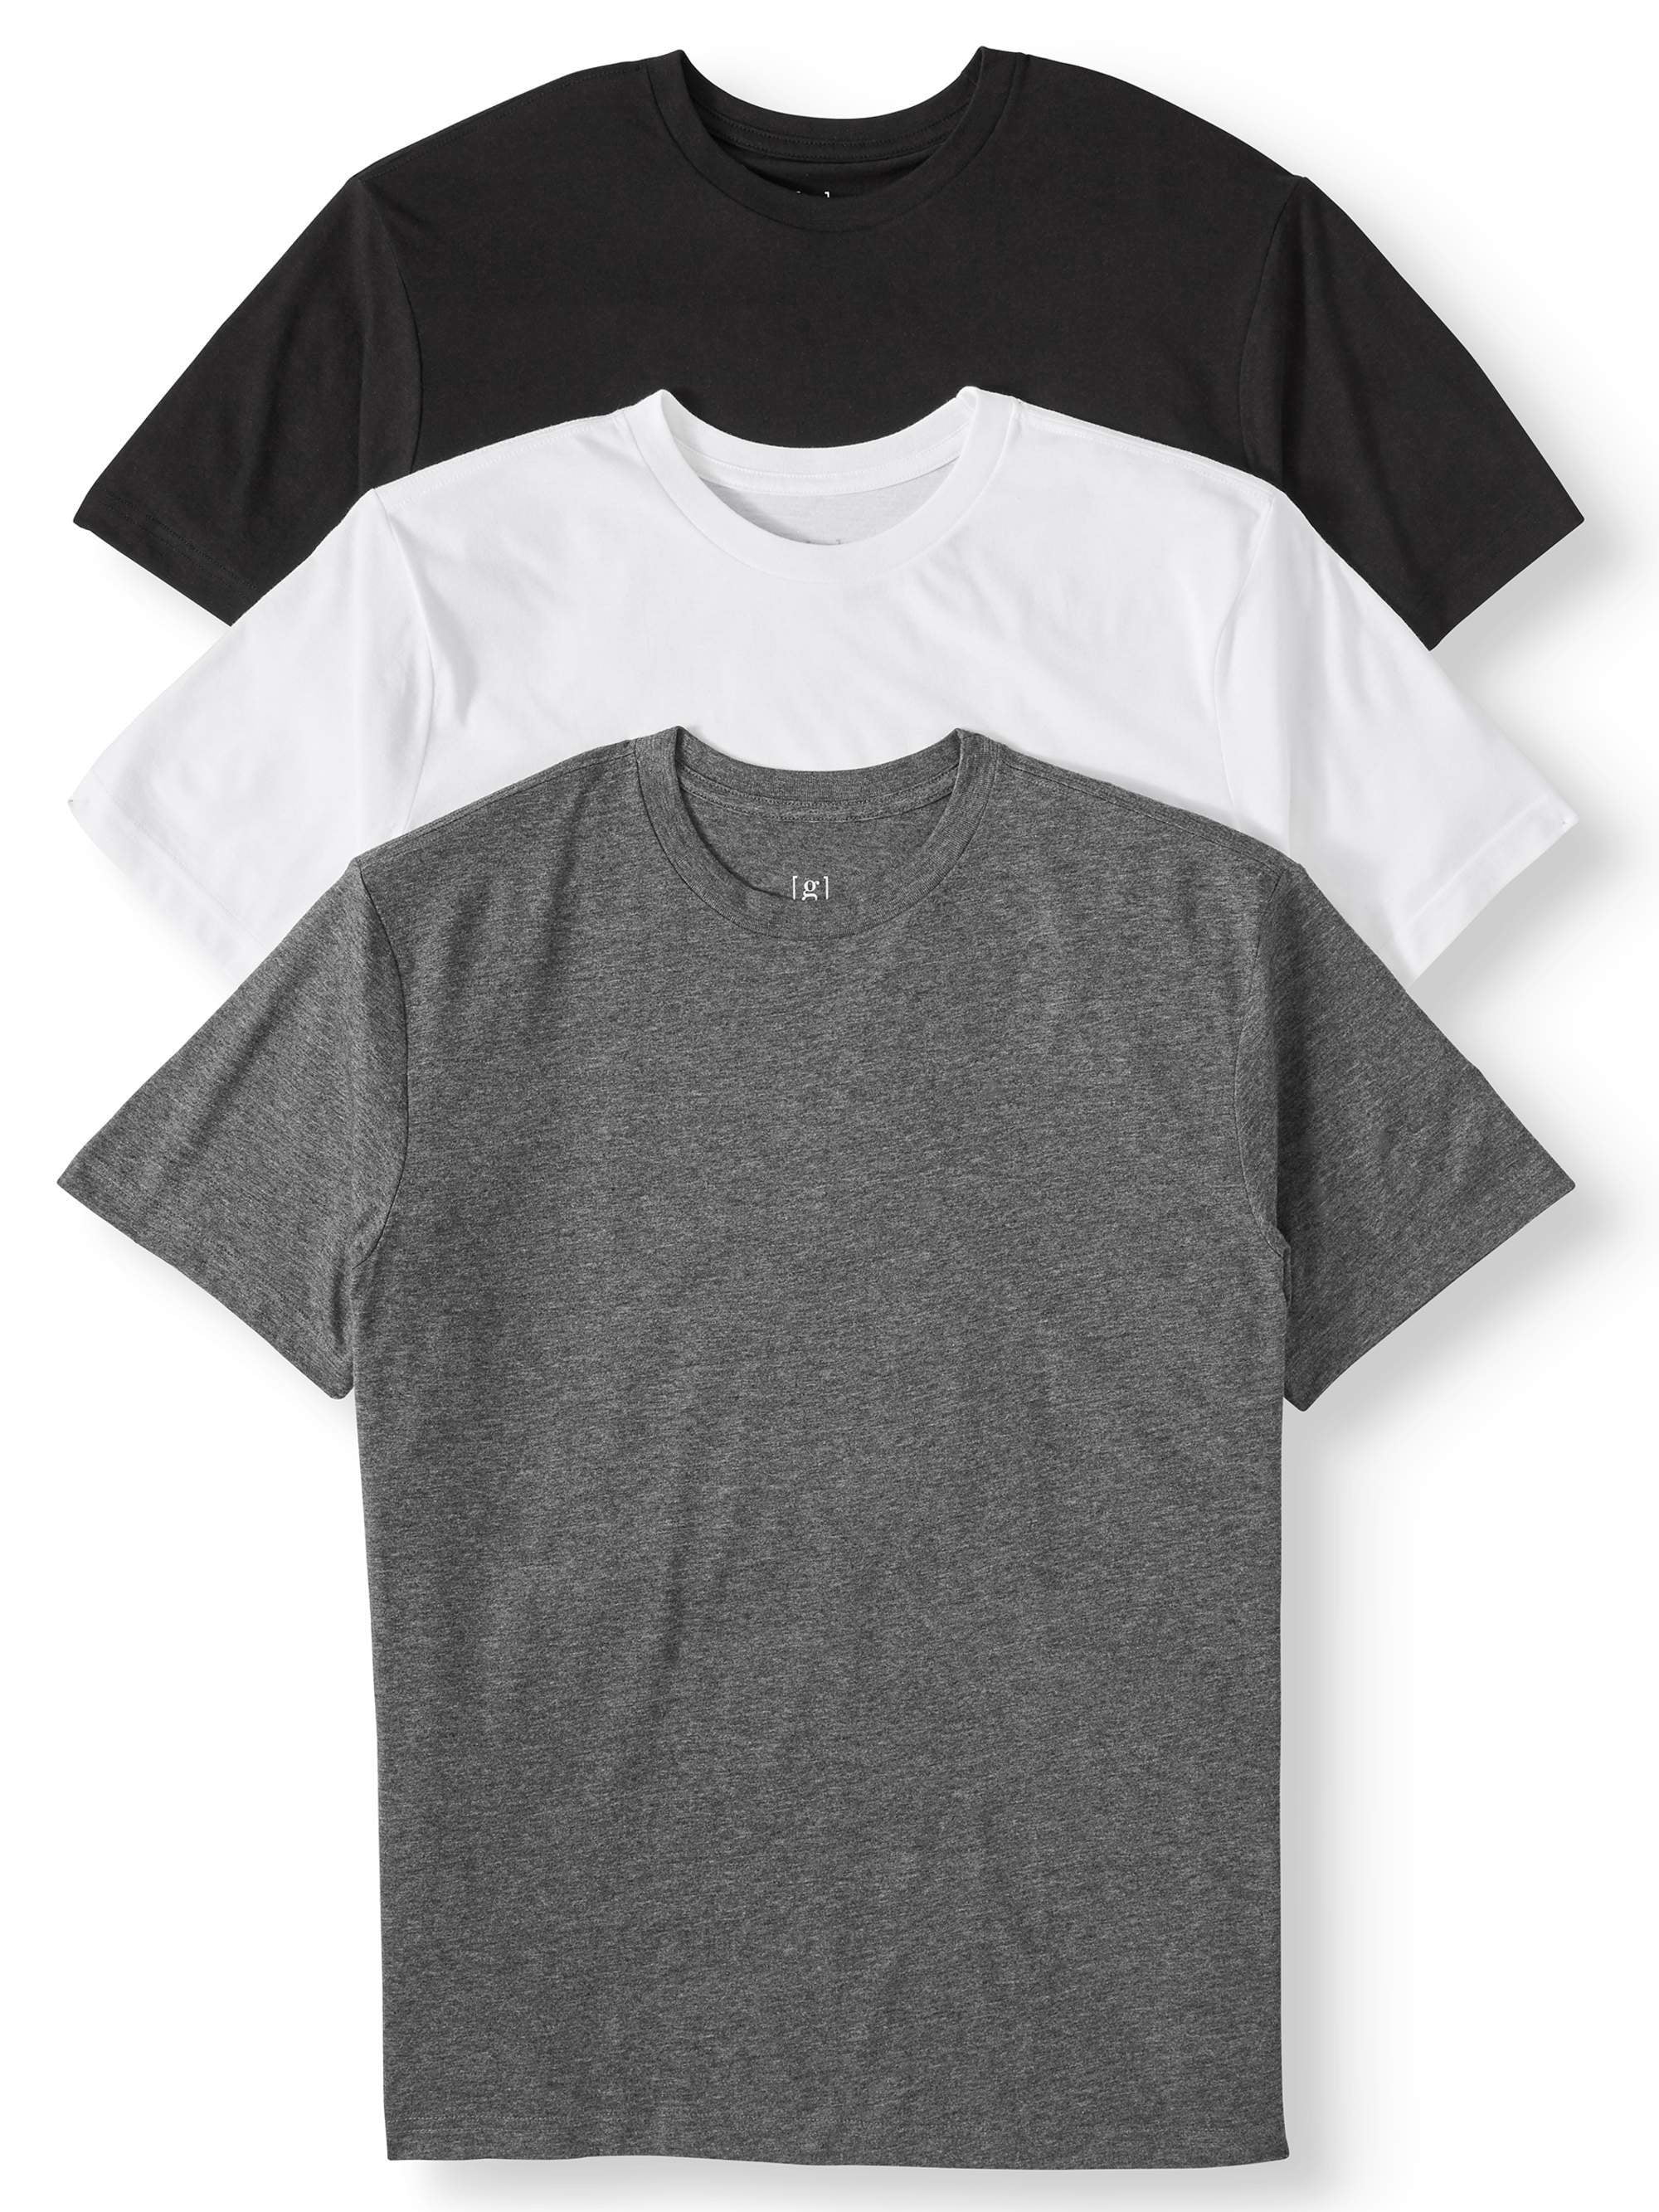 George Men's and Big Men's Short Sleeve Crew Tee - 3-Pack, Up To Size ...